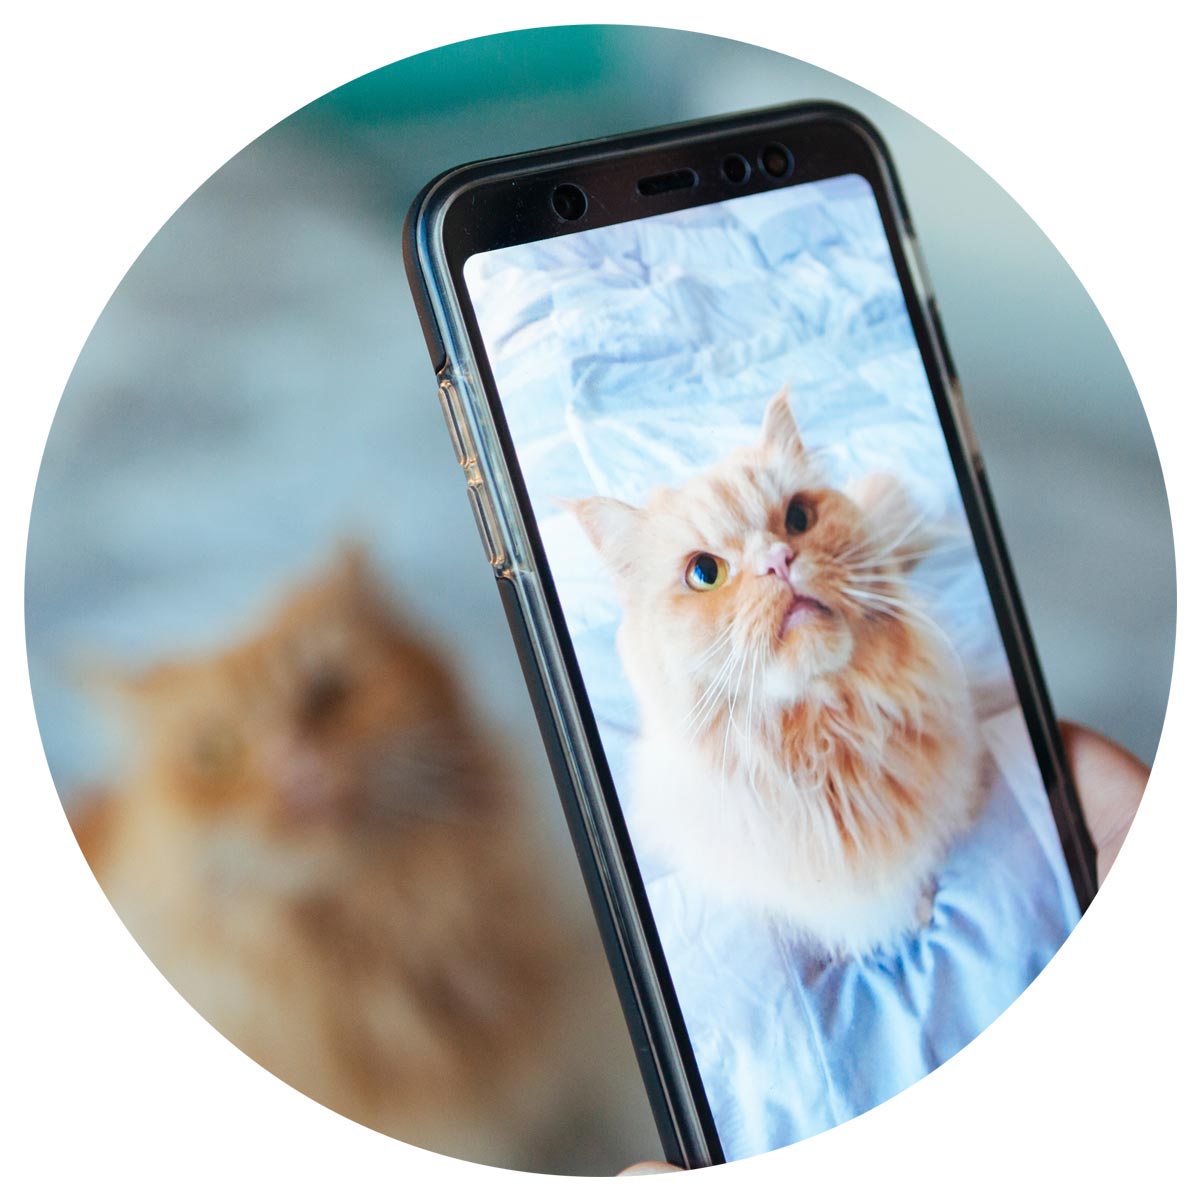 cat being photographed on a cell phone